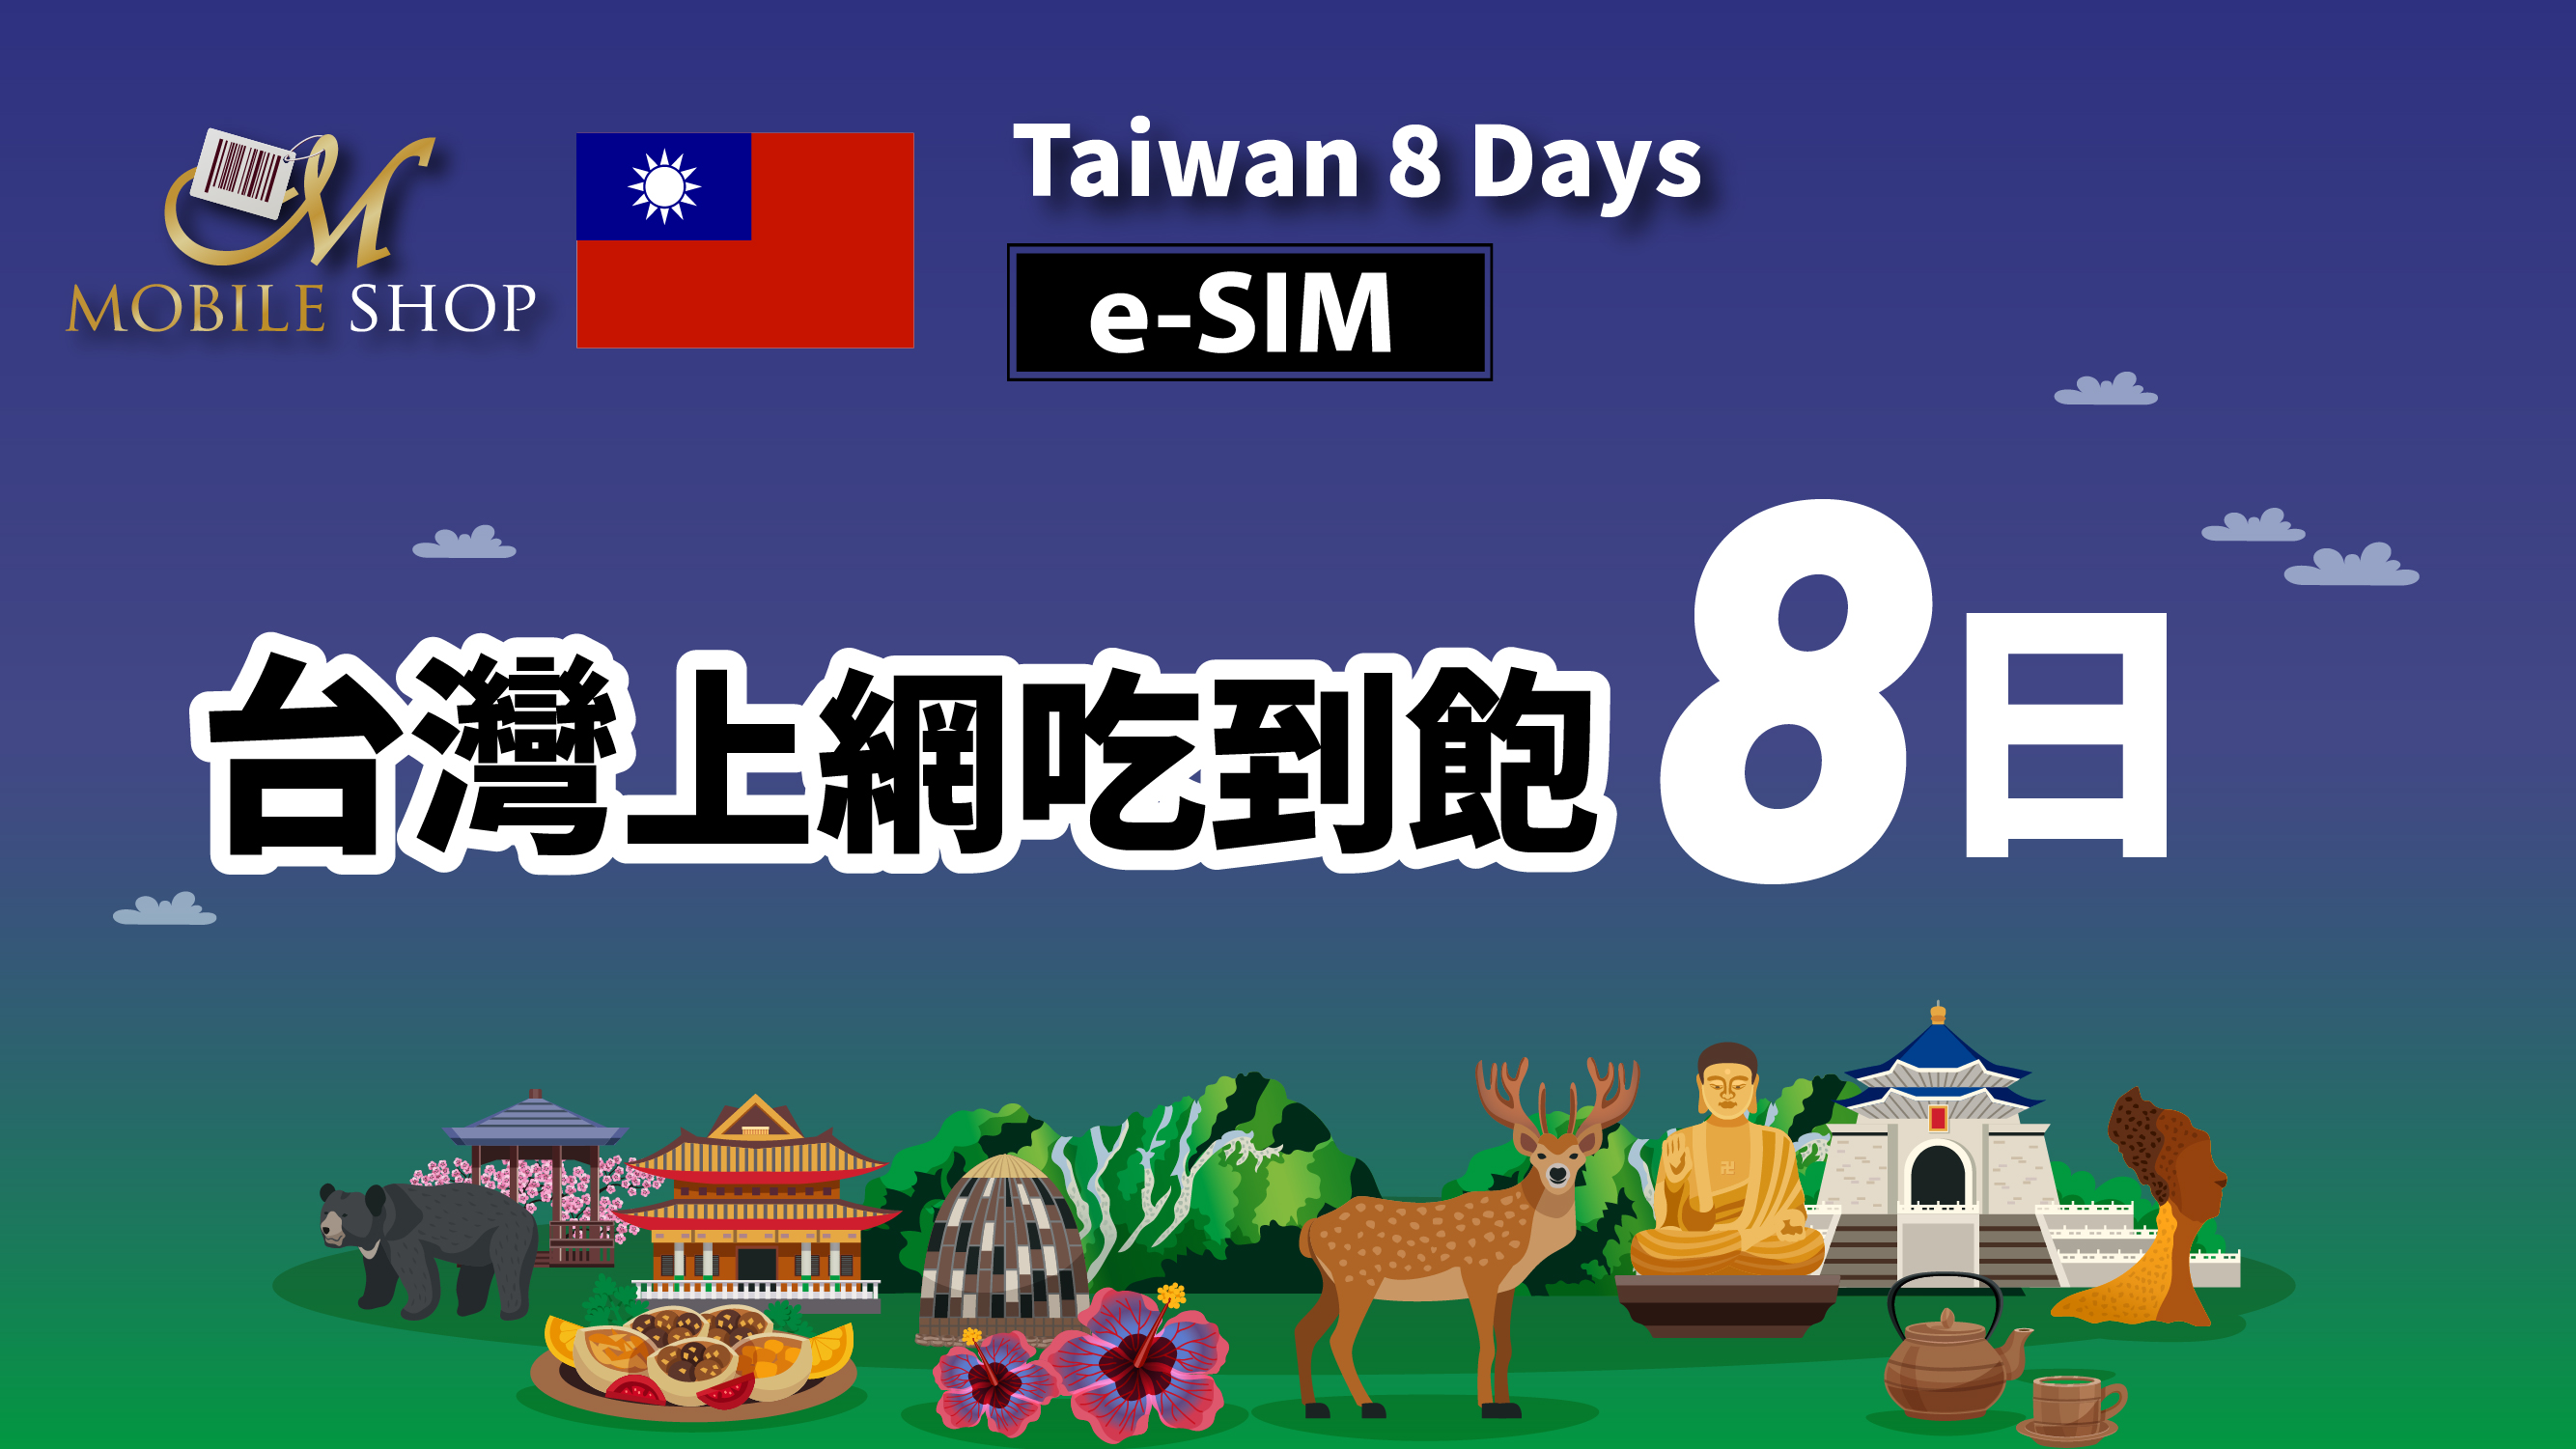 eSIM_Taiwan 8days_6GB unlimited data(sold out)